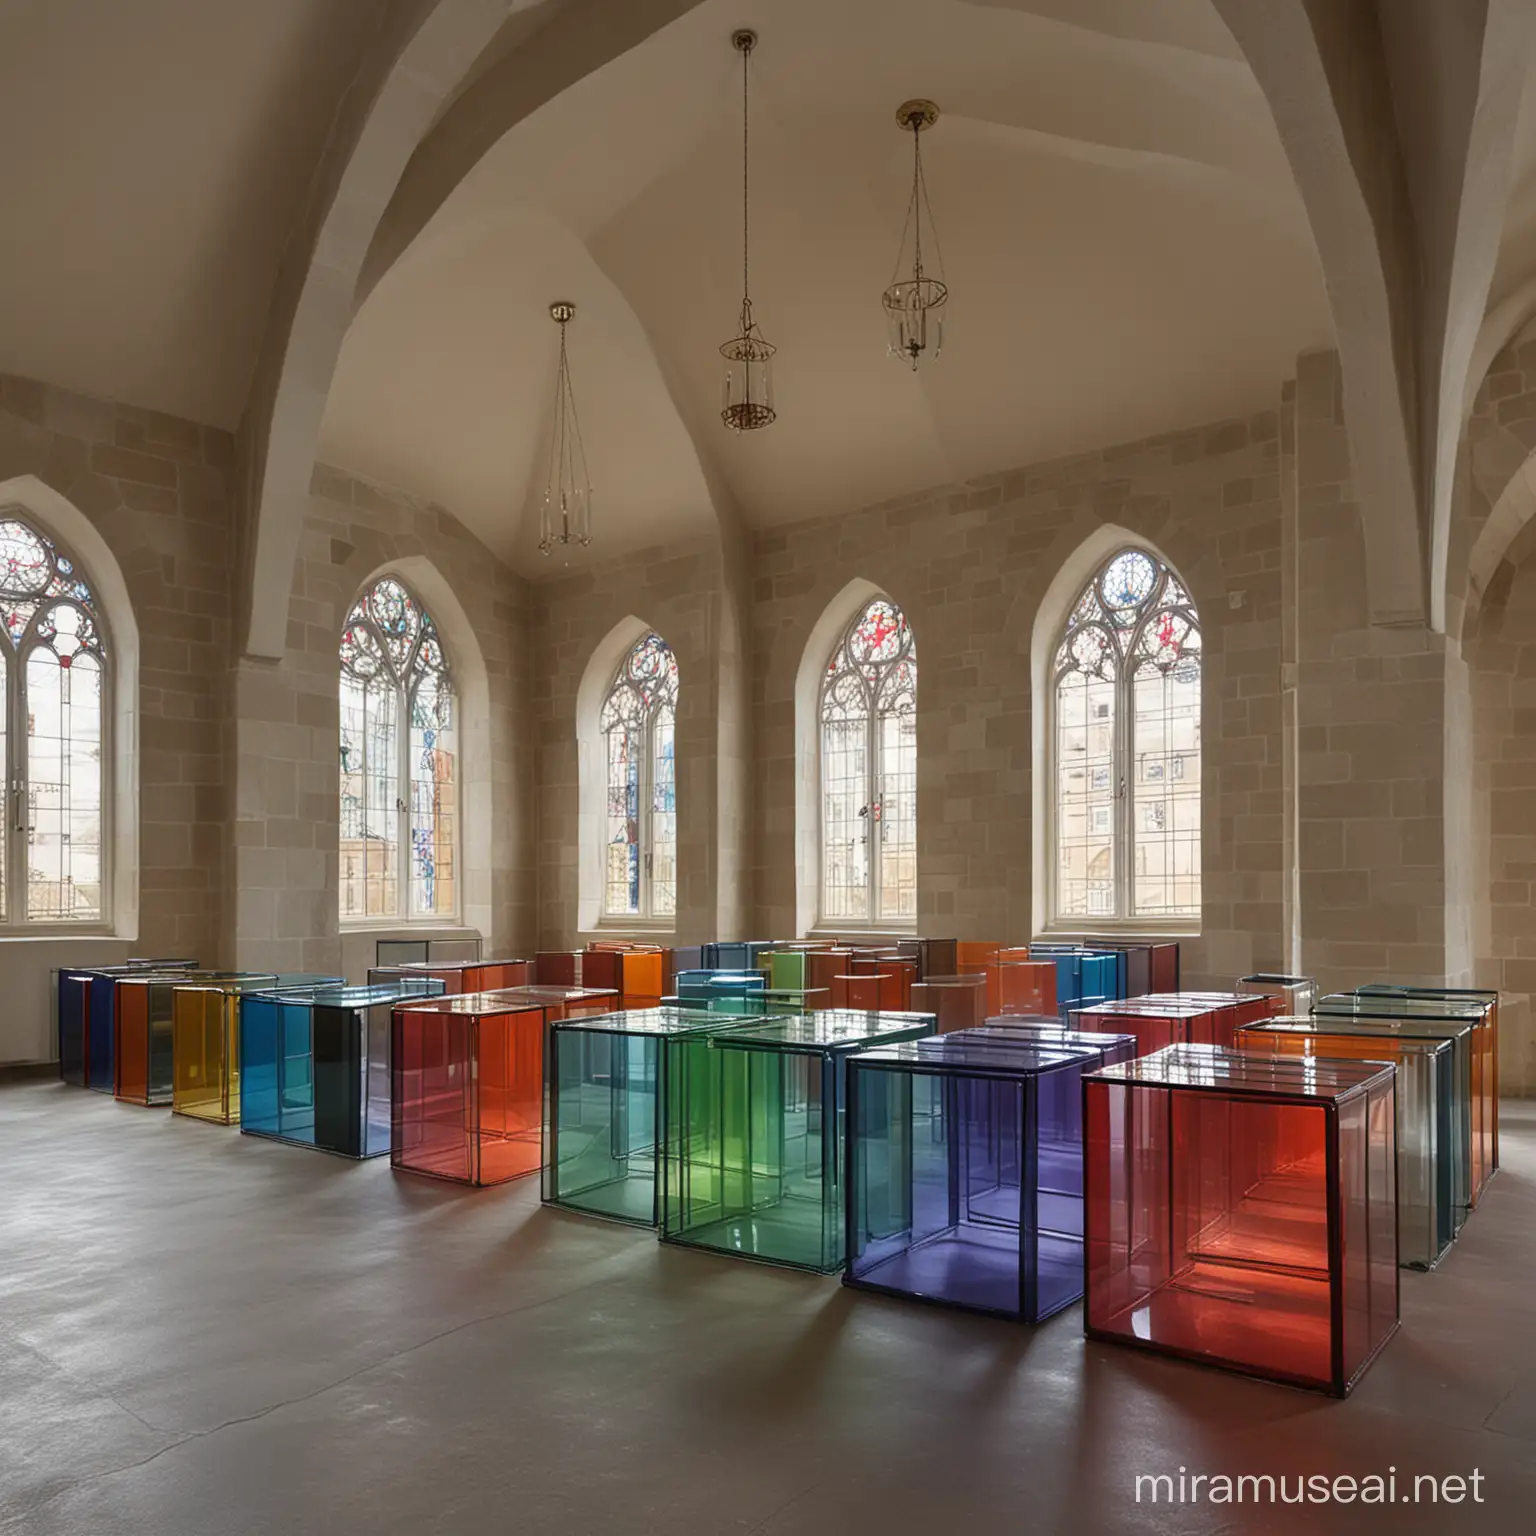 Colord glass office boxes/ unites, in a group, located in a historical church 